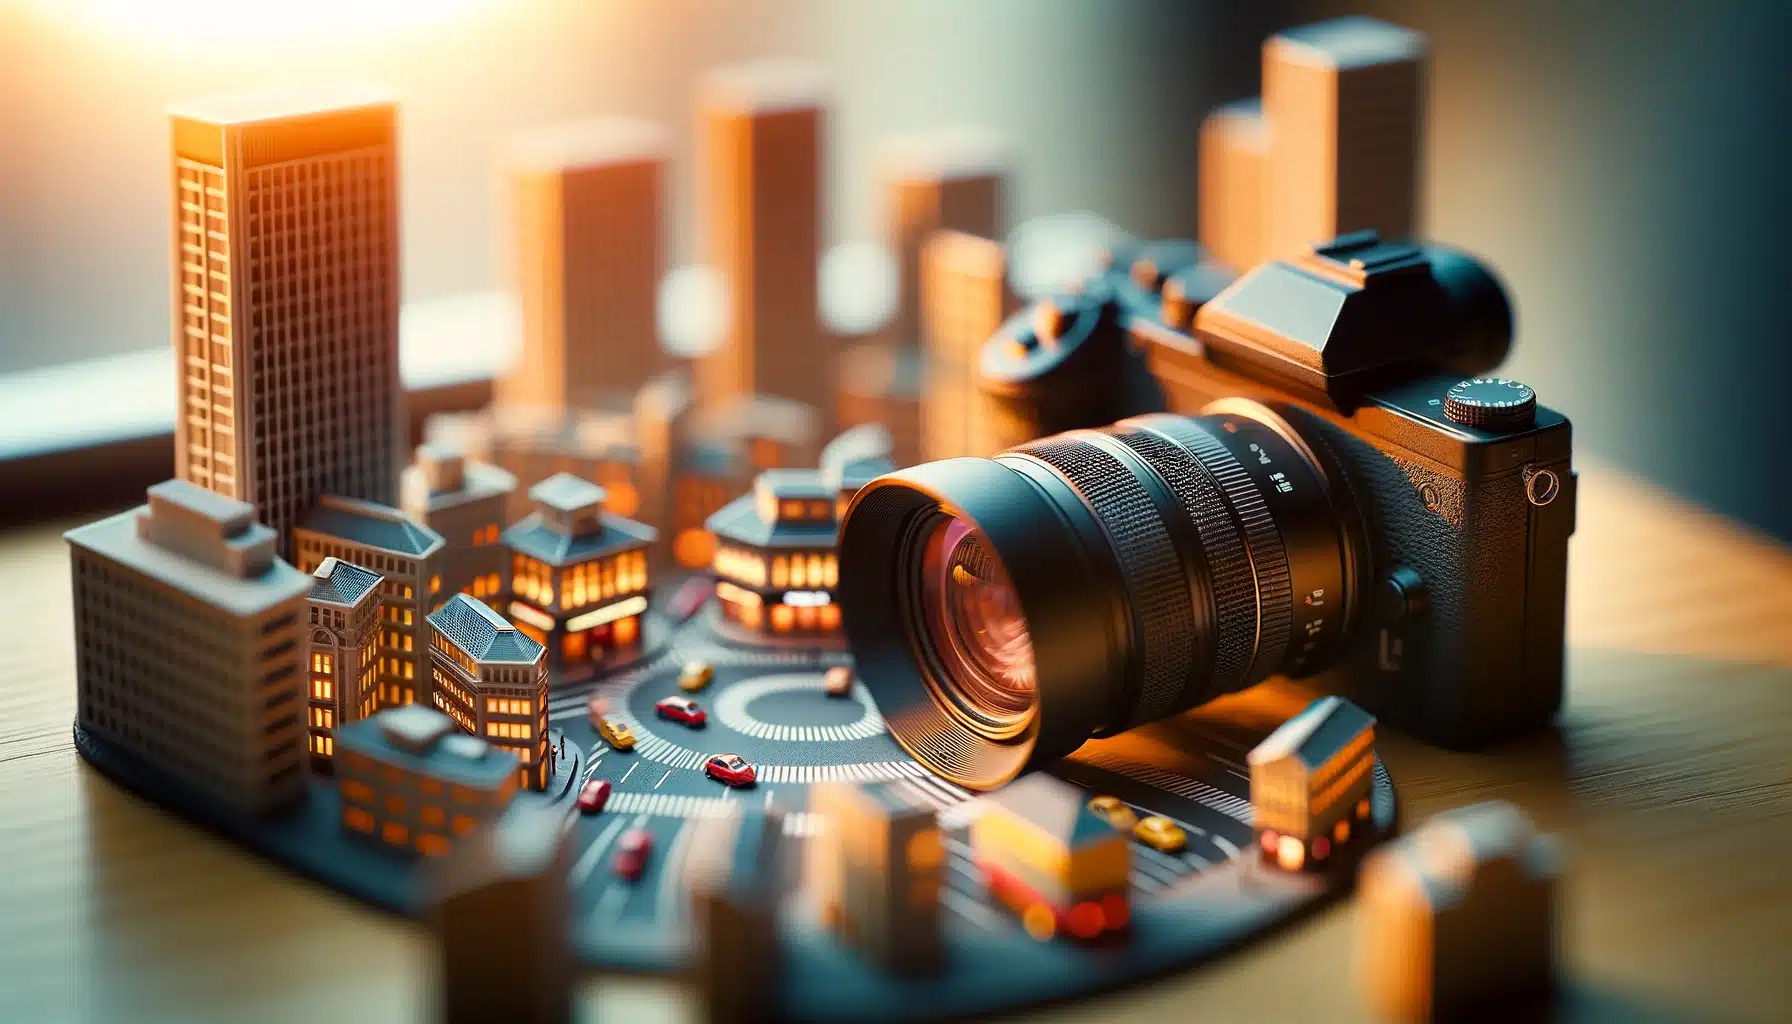 Camera equipped with a tilt-shift lens capturing an architectural subject with areas in sharp focus and others artistically blurred